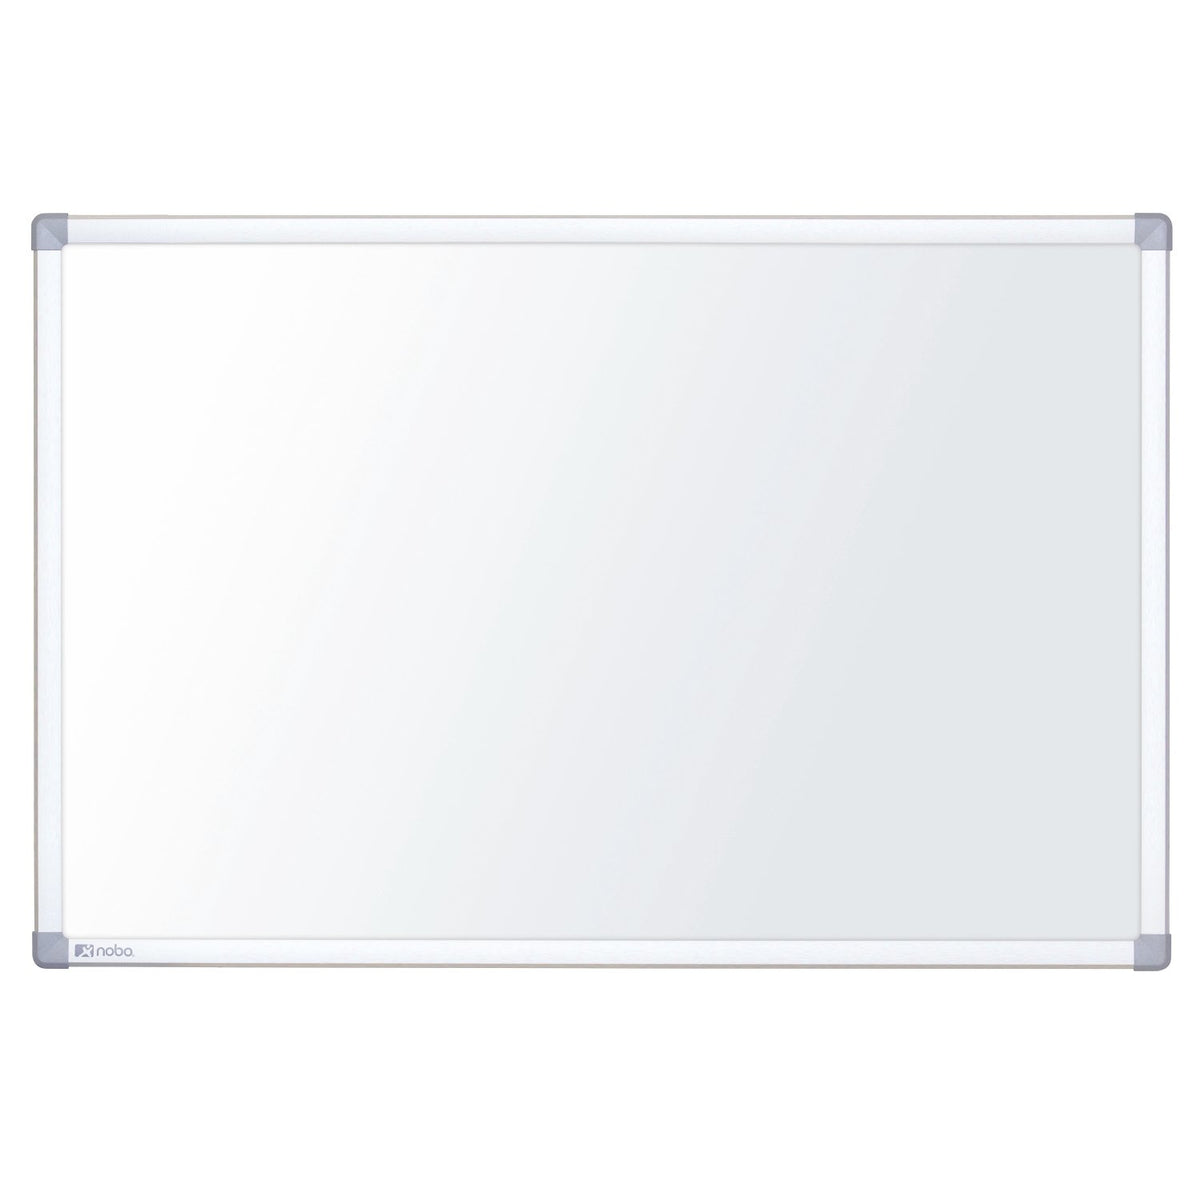 Nobo Nano Clean - White board - wall mountable - 1200 x 900 mm - painted steel - magnetic - white - silver aluminum frame